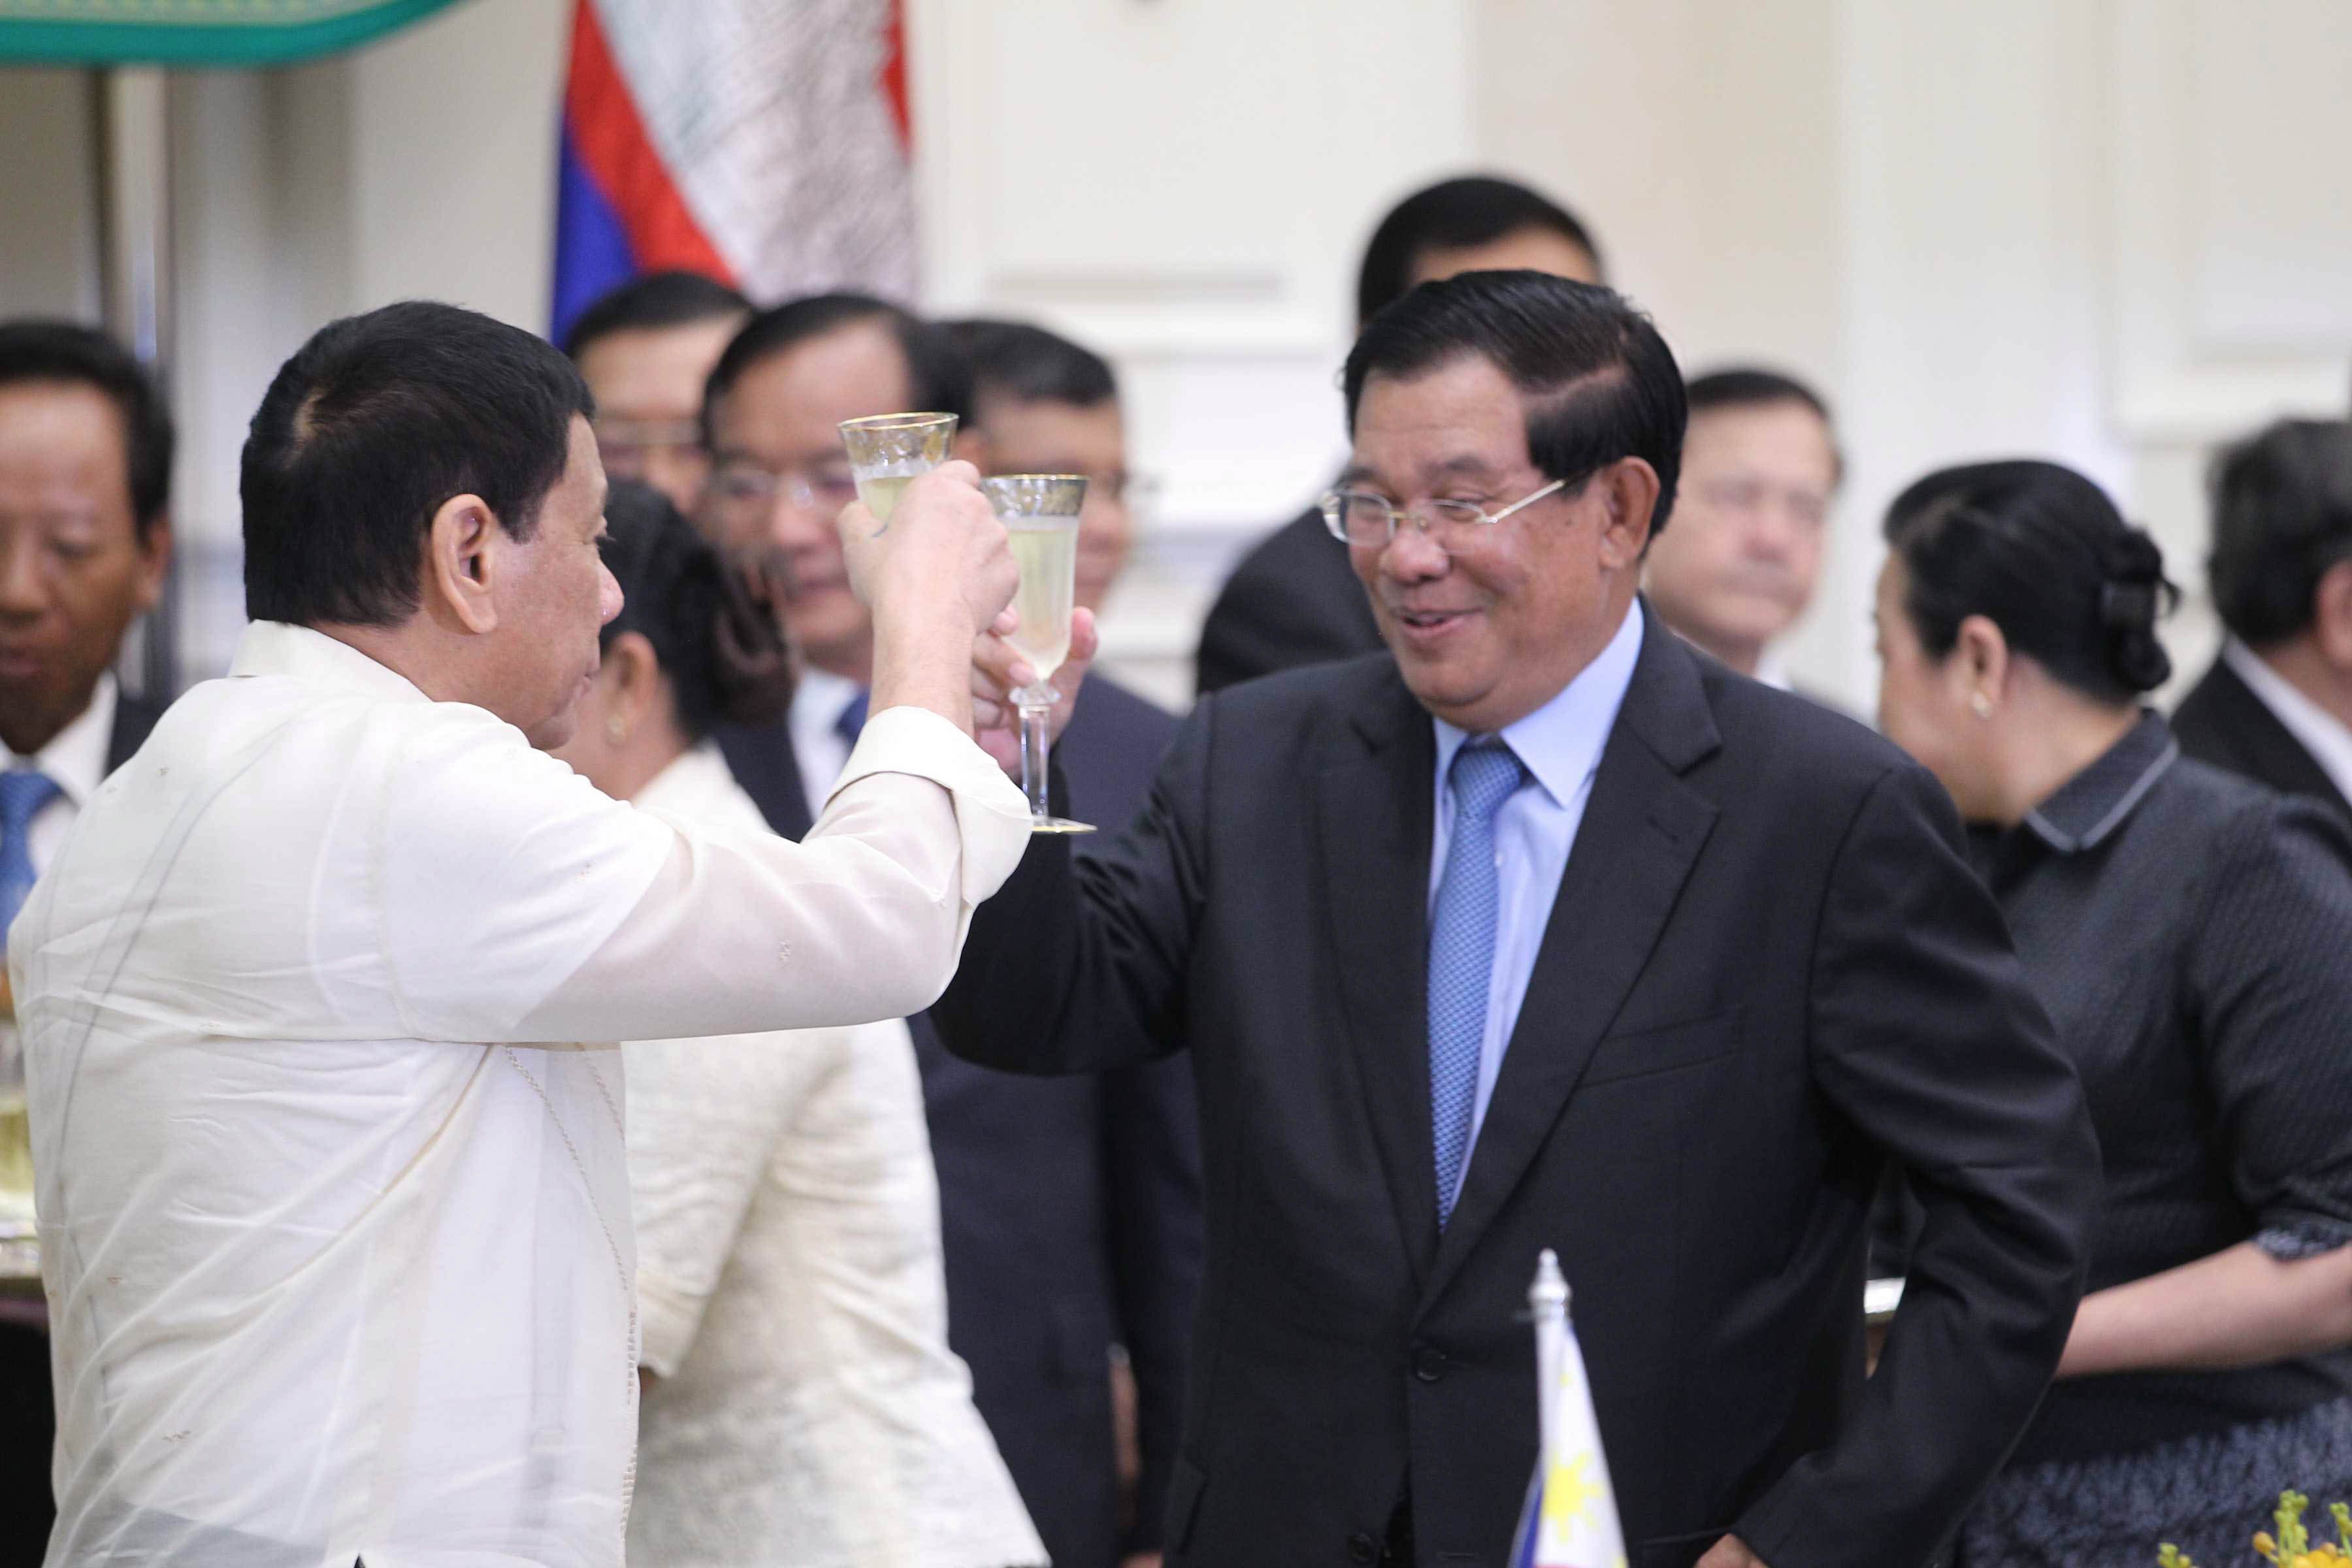 SUCCESSFUL MEETING. President Duterte and Cambodia Prime Minister Hun Sen raise their glasses for a toast 